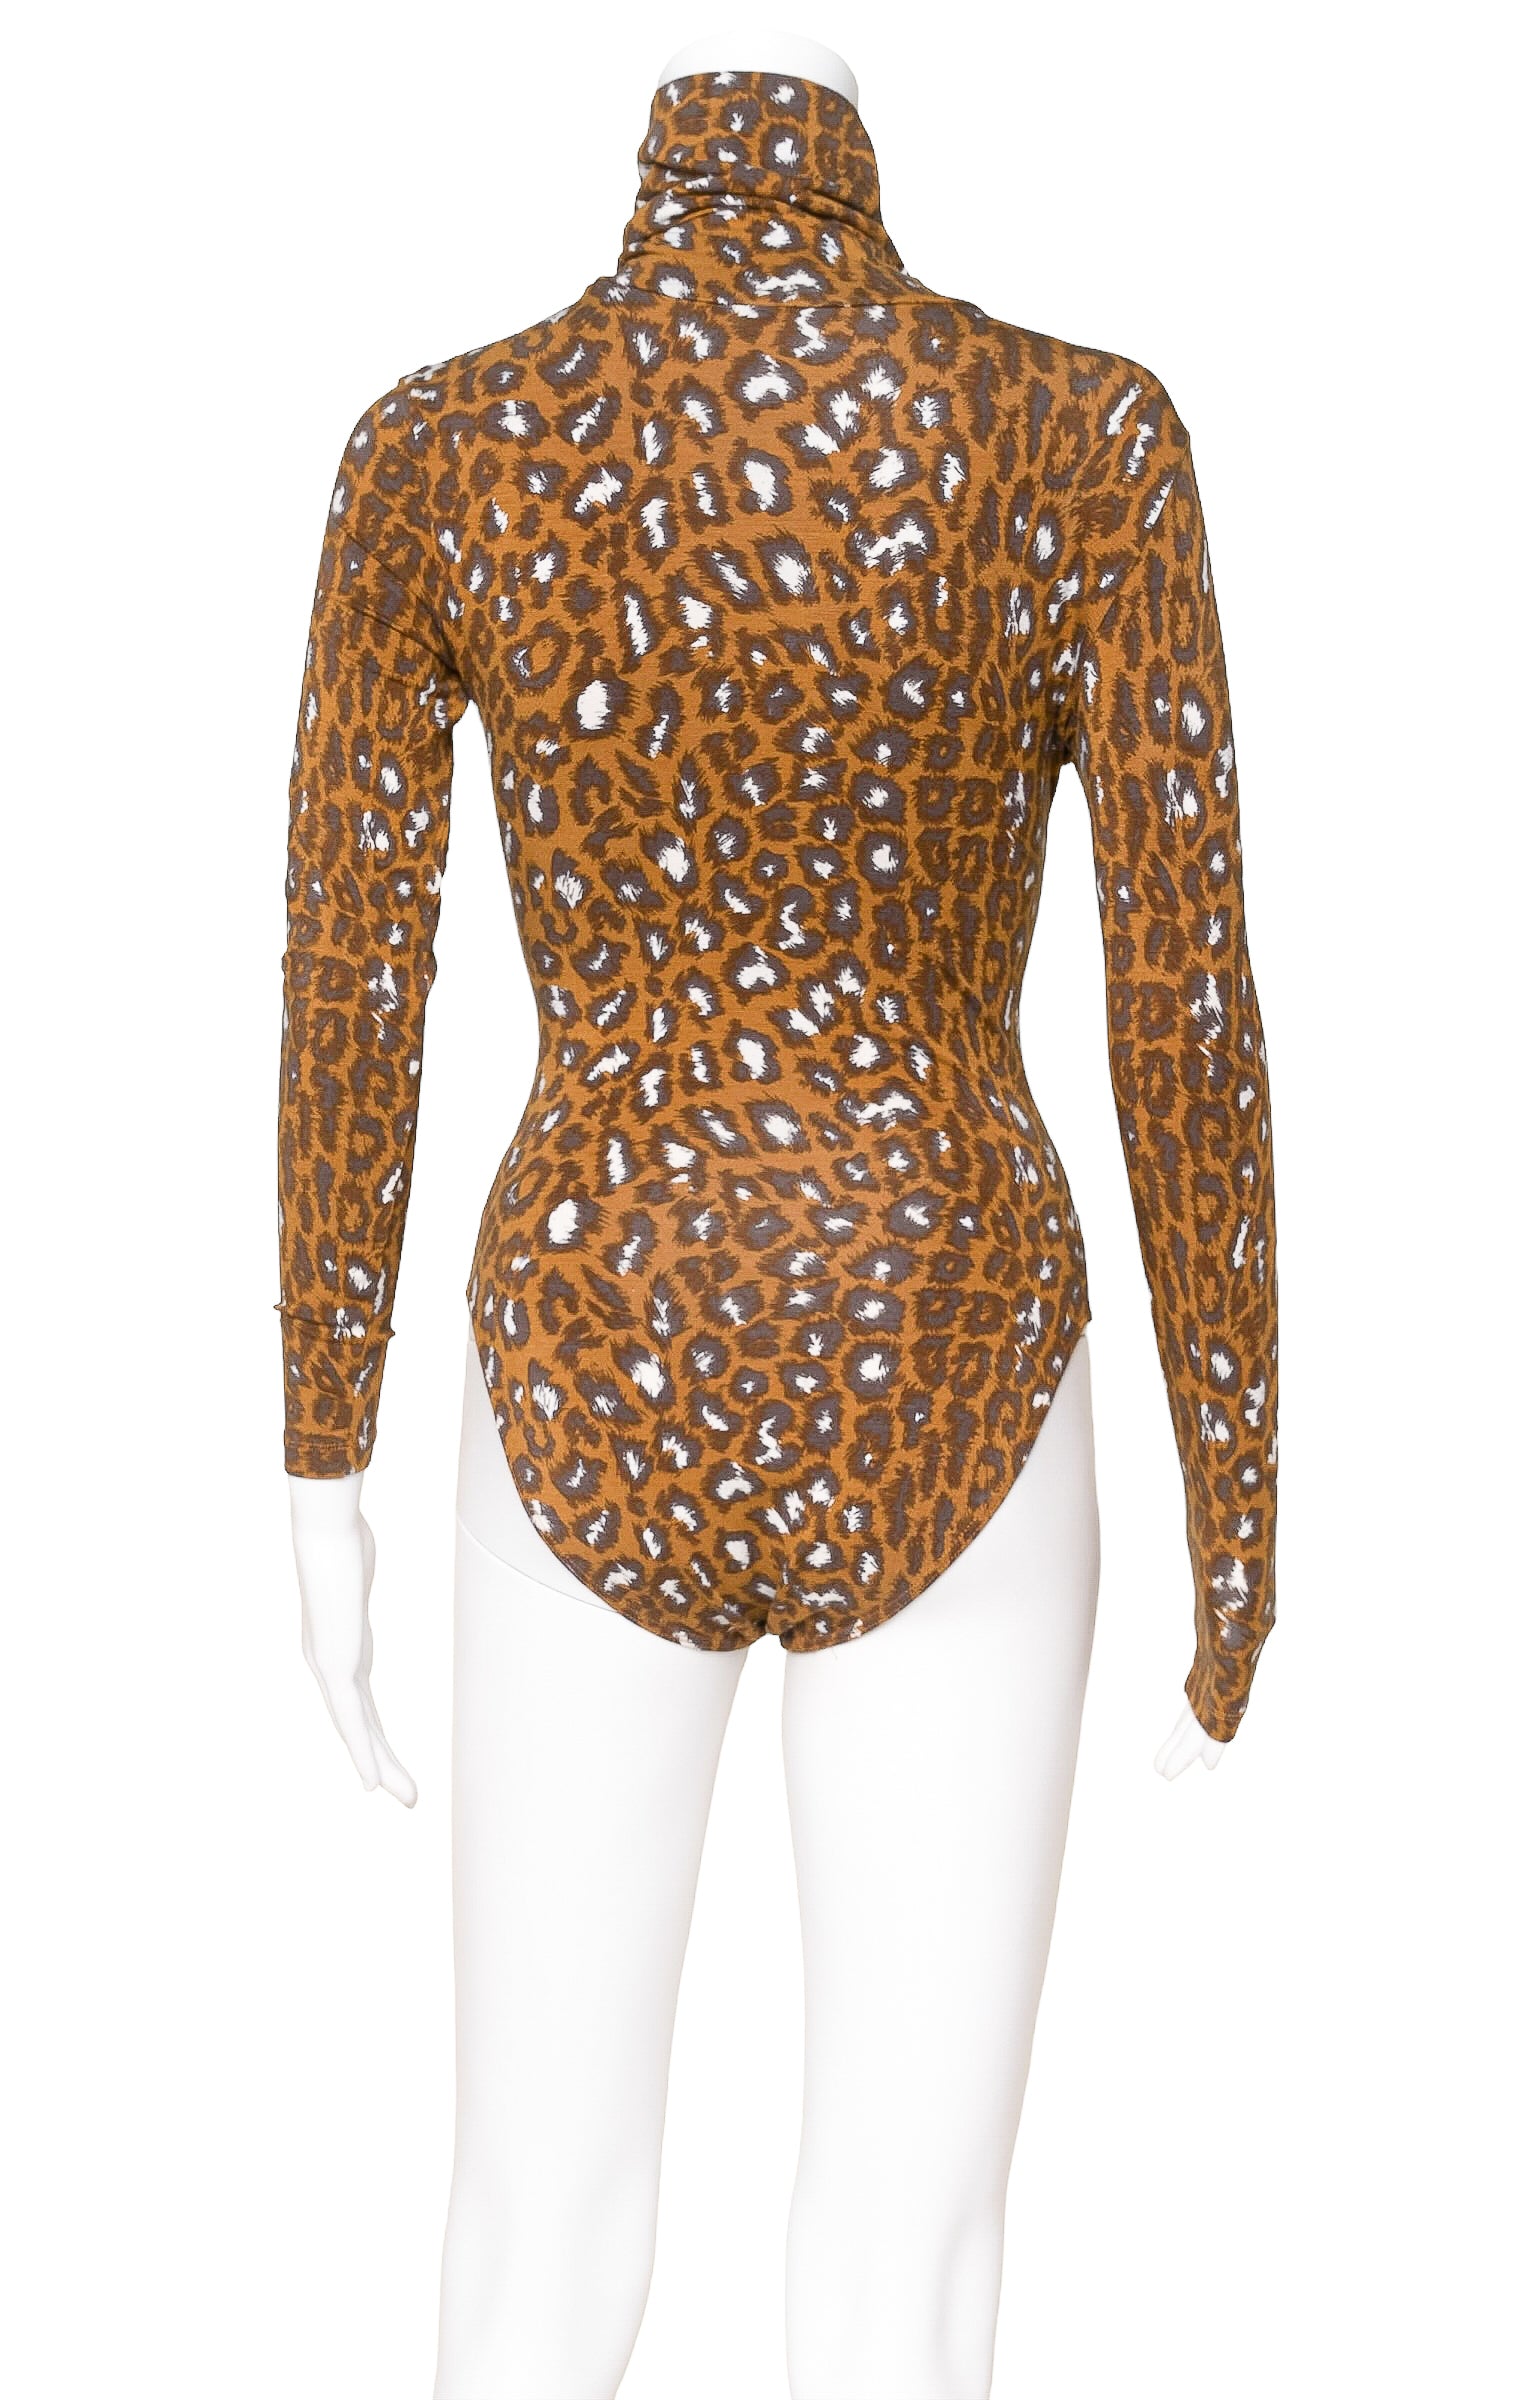 VINTAGE VERSUS BY GIANNI VERSACE (RARE) Bodysuit Size: O/S